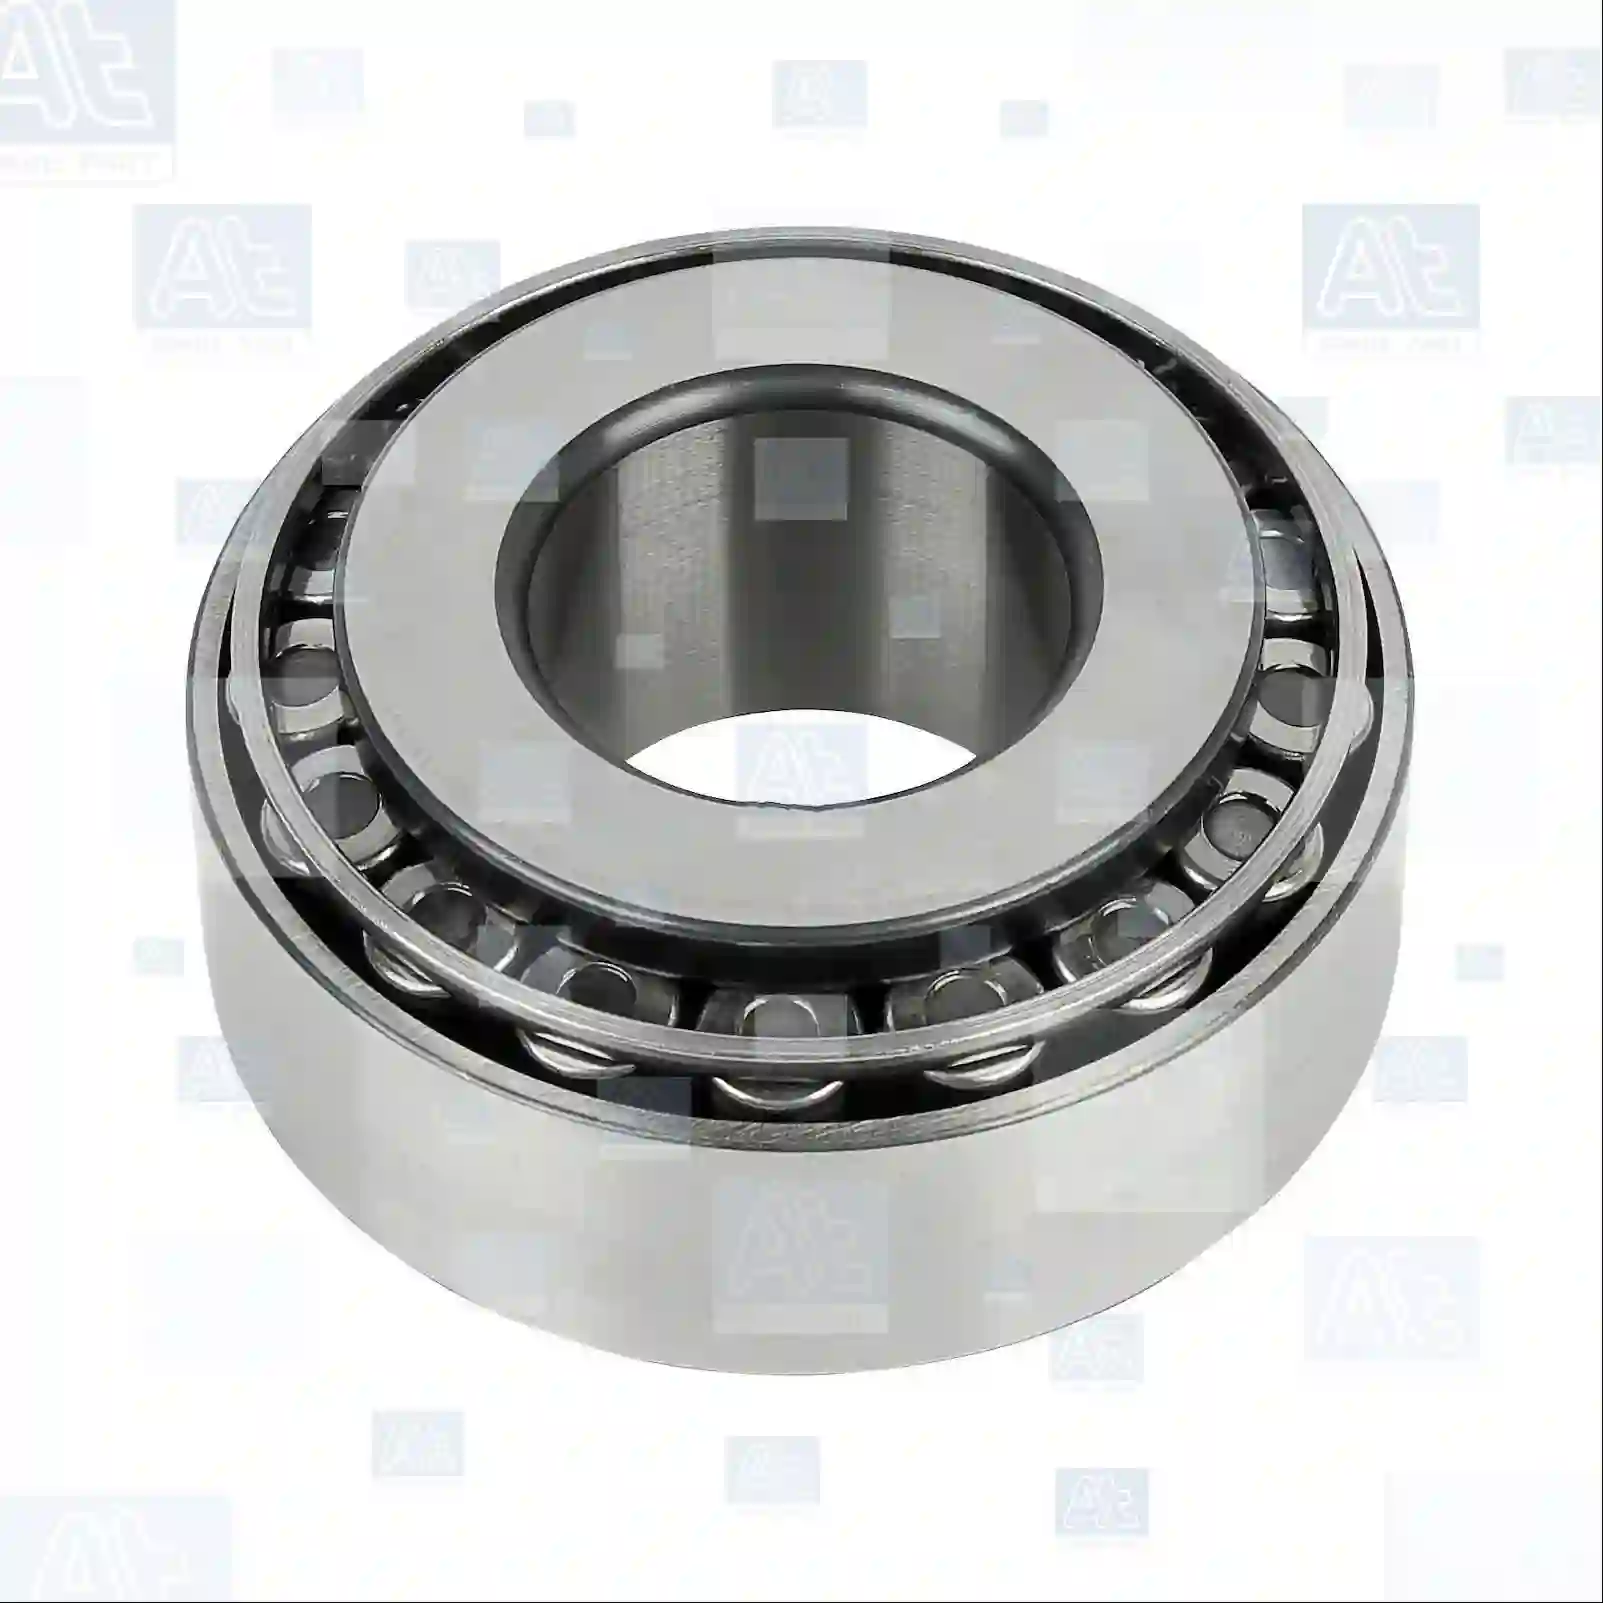 Tapered roller bearing, 77726116, 01110016, 94020015, 988435111, 988435111A, 988435120, 988435120A, SZ36635010, 10981-20010, 1-09812001-0, 8-94435342-0, 9-00093125-1, 9-00093621-0, 01110016, 00540-27210, 060427141, M02527210, 0009819605, 000720032307, 0019815605, 0019817005, 0039816405, 0049813405, 0049813805, 0069810705, 0069816105, 09022-0010P, 38120-61000, 0023336102, 0023432307, 0773230700, 77192, 90366-30023, 90366-35021, 90366-35023, 90366-35031, 90366-35055, 90366-35073, 97609-32307, 11063 ||  77726116 At Spare Part | Engine, Accelerator Pedal, Camshaft, Connecting Rod, Crankcase, Crankshaft, Cylinder Head, Engine Suspension Mountings, Exhaust Manifold, Exhaust Gas Recirculation, Filter Kits, Flywheel Housing, General Overhaul Kits, Engine, Intake Manifold, Oil Cleaner, Oil Cooler, Oil Filter, Oil Pump, Oil Sump, Piston & Liner, Sensor & Switch, Timing Case, Turbocharger, Cooling System, Belt Tensioner, Coolant Filter, Coolant Pipe, Corrosion Prevention Agent, Drive, Expansion Tank, Fan, Intercooler, Monitors & Gauges, Radiator, Thermostat, V-Belt / Timing belt, Water Pump, Fuel System, Electronical Injector Unit, Feed Pump, Fuel Filter, cpl., Fuel Gauge Sender,  Fuel Line, Fuel Pump, Fuel Tank, Injection Line Kit, Injection Pump, Exhaust System, Clutch & Pedal, Gearbox, Propeller Shaft, Axles, Brake System, Hubs & Wheels, Suspension, Leaf Spring, Universal Parts / Accessories, Steering, Electrical System, Cabin Tapered roller bearing, 77726116, 01110016, 94020015, 988435111, 988435111A, 988435120, 988435120A, SZ36635010, 10981-20010, 1-09812001-0, 8-94435342-0, 9-00093125-1, 9-00093621-0, 01110016, 00540-27210, 060427141, M02527210, 0009819605, 000720032307, 0019815605, 0019817005, 0039816405, 0049813405, 0049813805, 0069810705, 0069816105, 09022-0010P, 38120-61000, 0023336102, 0023432307, 0773230700, 77192, 90366-30023, 90366-35021, 90366-35023, 90366-35031, 90366-35055, 90366-35073, 97609-32307, 11063 ||  77726116 At Spare Part | Engine, Accelerator Pedal, Camshaft, Connecting Rod, Crankcase, Crankshaft, Cylinder Head, Engine Suspension Mountings, Exhaust Manifold, Exhaust Gas Recirculation, Filter Kits, Flywheel Housing, General Overhaul Kits, Engine, Intake Manifold, Oil Cleaner, Oil Cooler, Oil Filter, Oil Pump, Oil Sump, Piston & Liner, Sensor & Switch, Timing Case, Turbocharger, Cooling System, Belt Tensioner, Coolant Filter, Coolant Pipe, Corrosion Prevention Agent, Drive, Expansion Tank, Fan, Intercooler, Monitors & Gauges, Radiator, Thermostat, V-Belt / Timing belt, Water Pump, Fuel System, Electronical Injector Unit, Feed Pump, Fuel Filter, cpl., Fuel Gauge Sender,  Fuel Line, Fuel Pump, Fuel Tank, Injection Line Kit, Injection Pump, Exhaust System, Clutch & Pedal, Gearbox, Propeller Shaft, Axles, Brake System, Hubs & Wheels, Suspension, Leaf Spring, Universal Parts / Accessories, Steering, Electrical System, Cabin